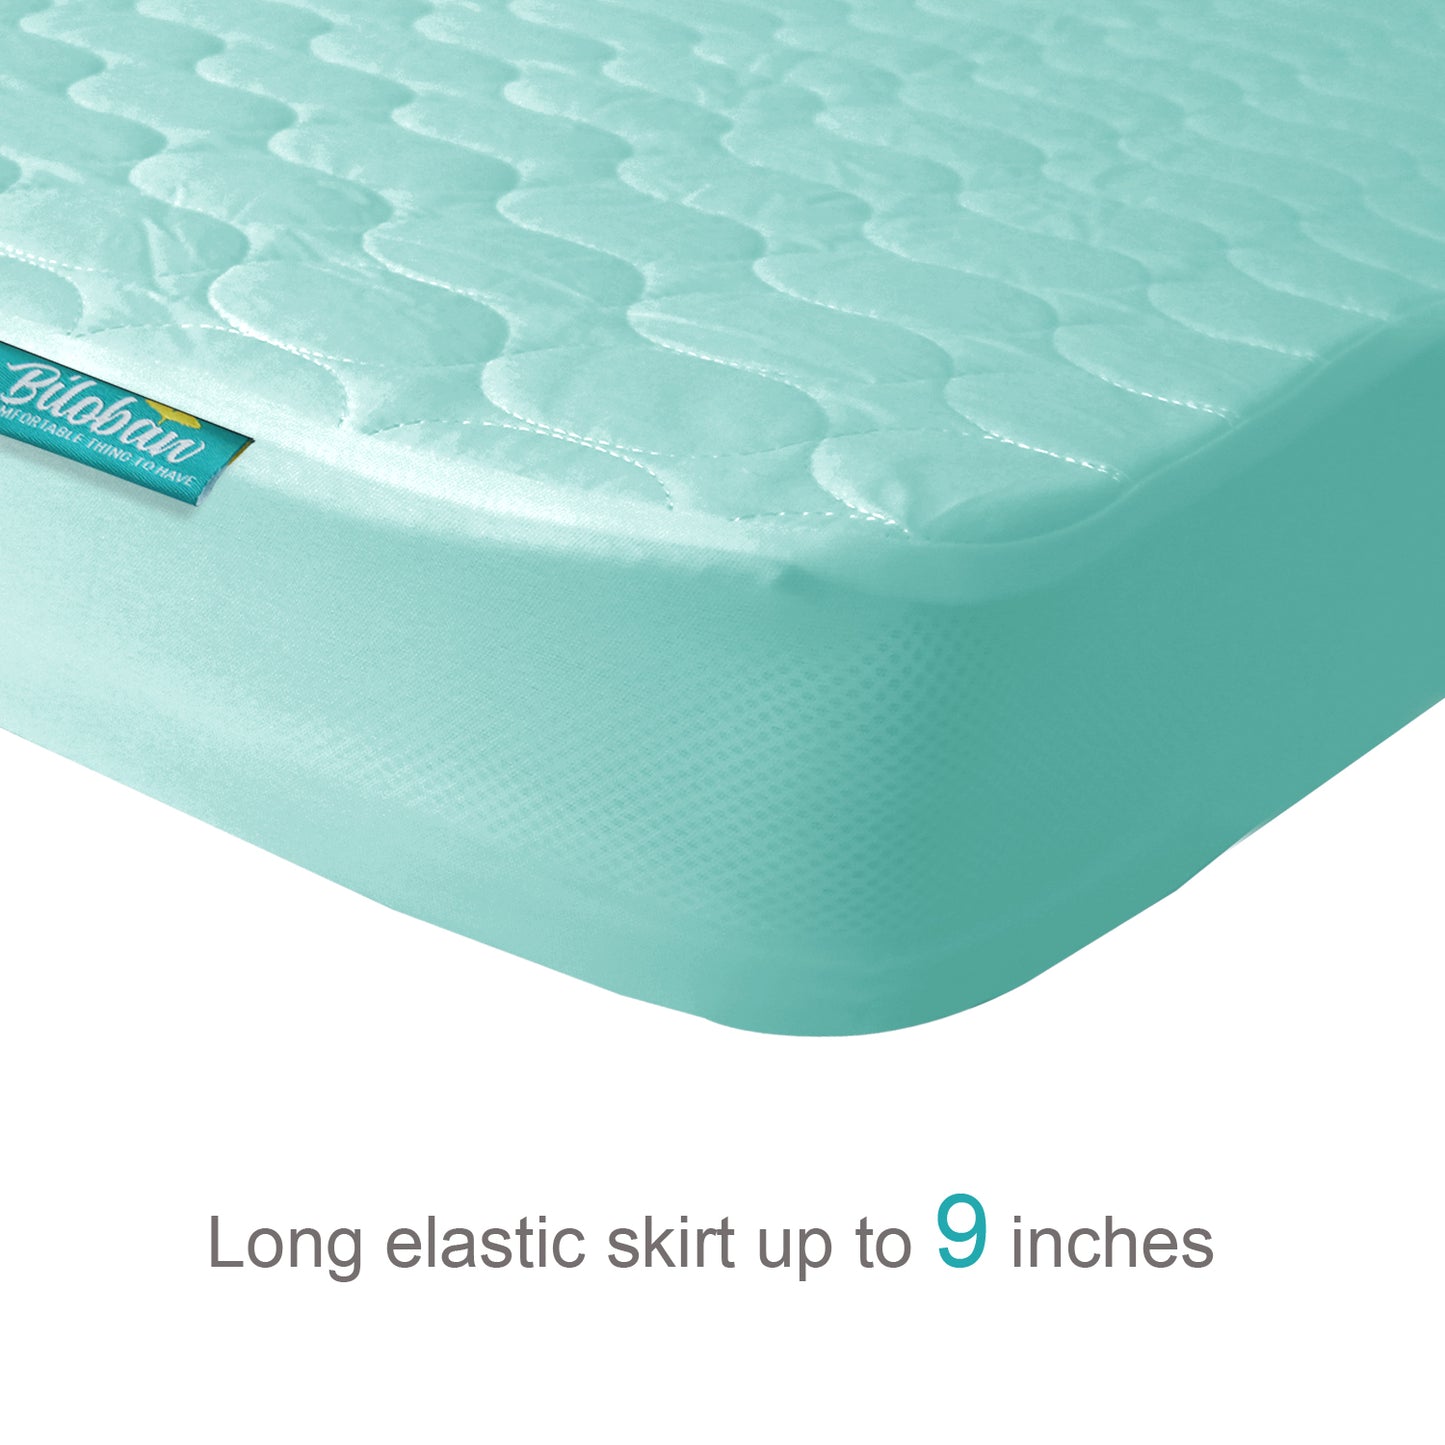 Waterproof Pack n Play Sheet Quilted, Pack and Play Mattress Pad Cover 39" X 27" fits for Baby Foldable and Playard Mattress, Portable Mini Crib, Aqua - Biloban Online Store